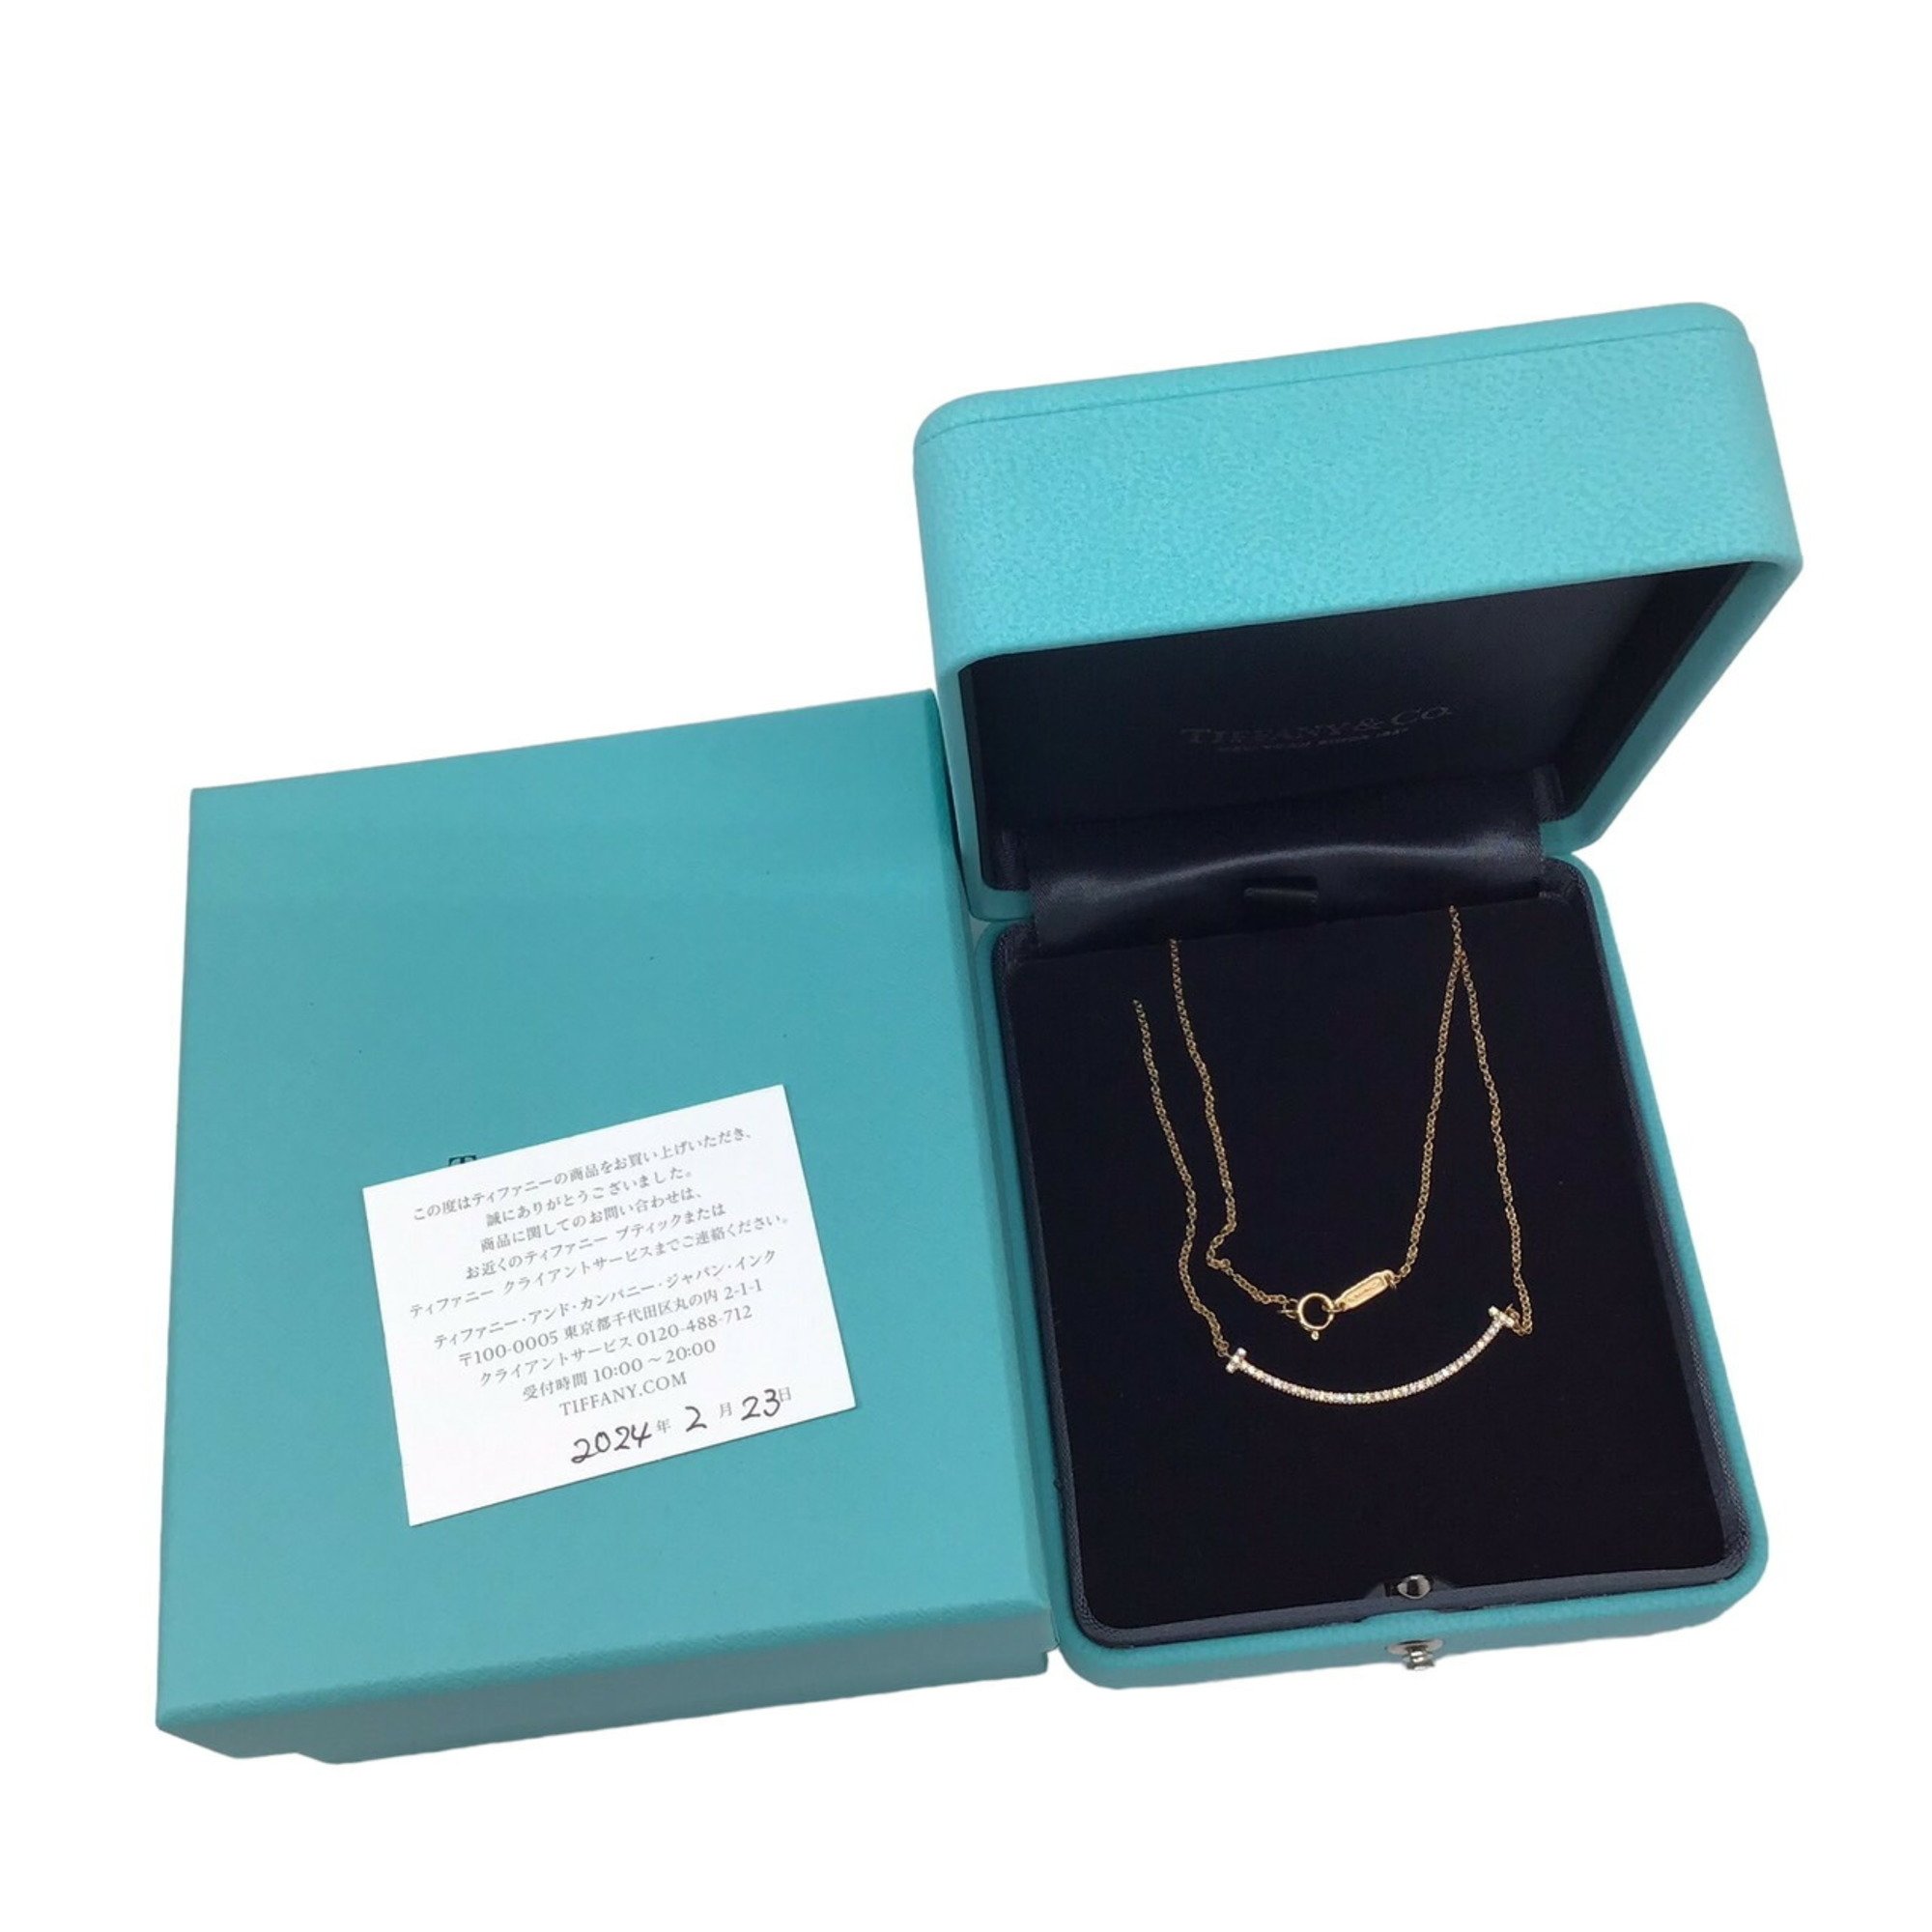 Tiffany & Co. T Smile Pendant Necklace K18RG Diamond Small Rose Gold Product Women's